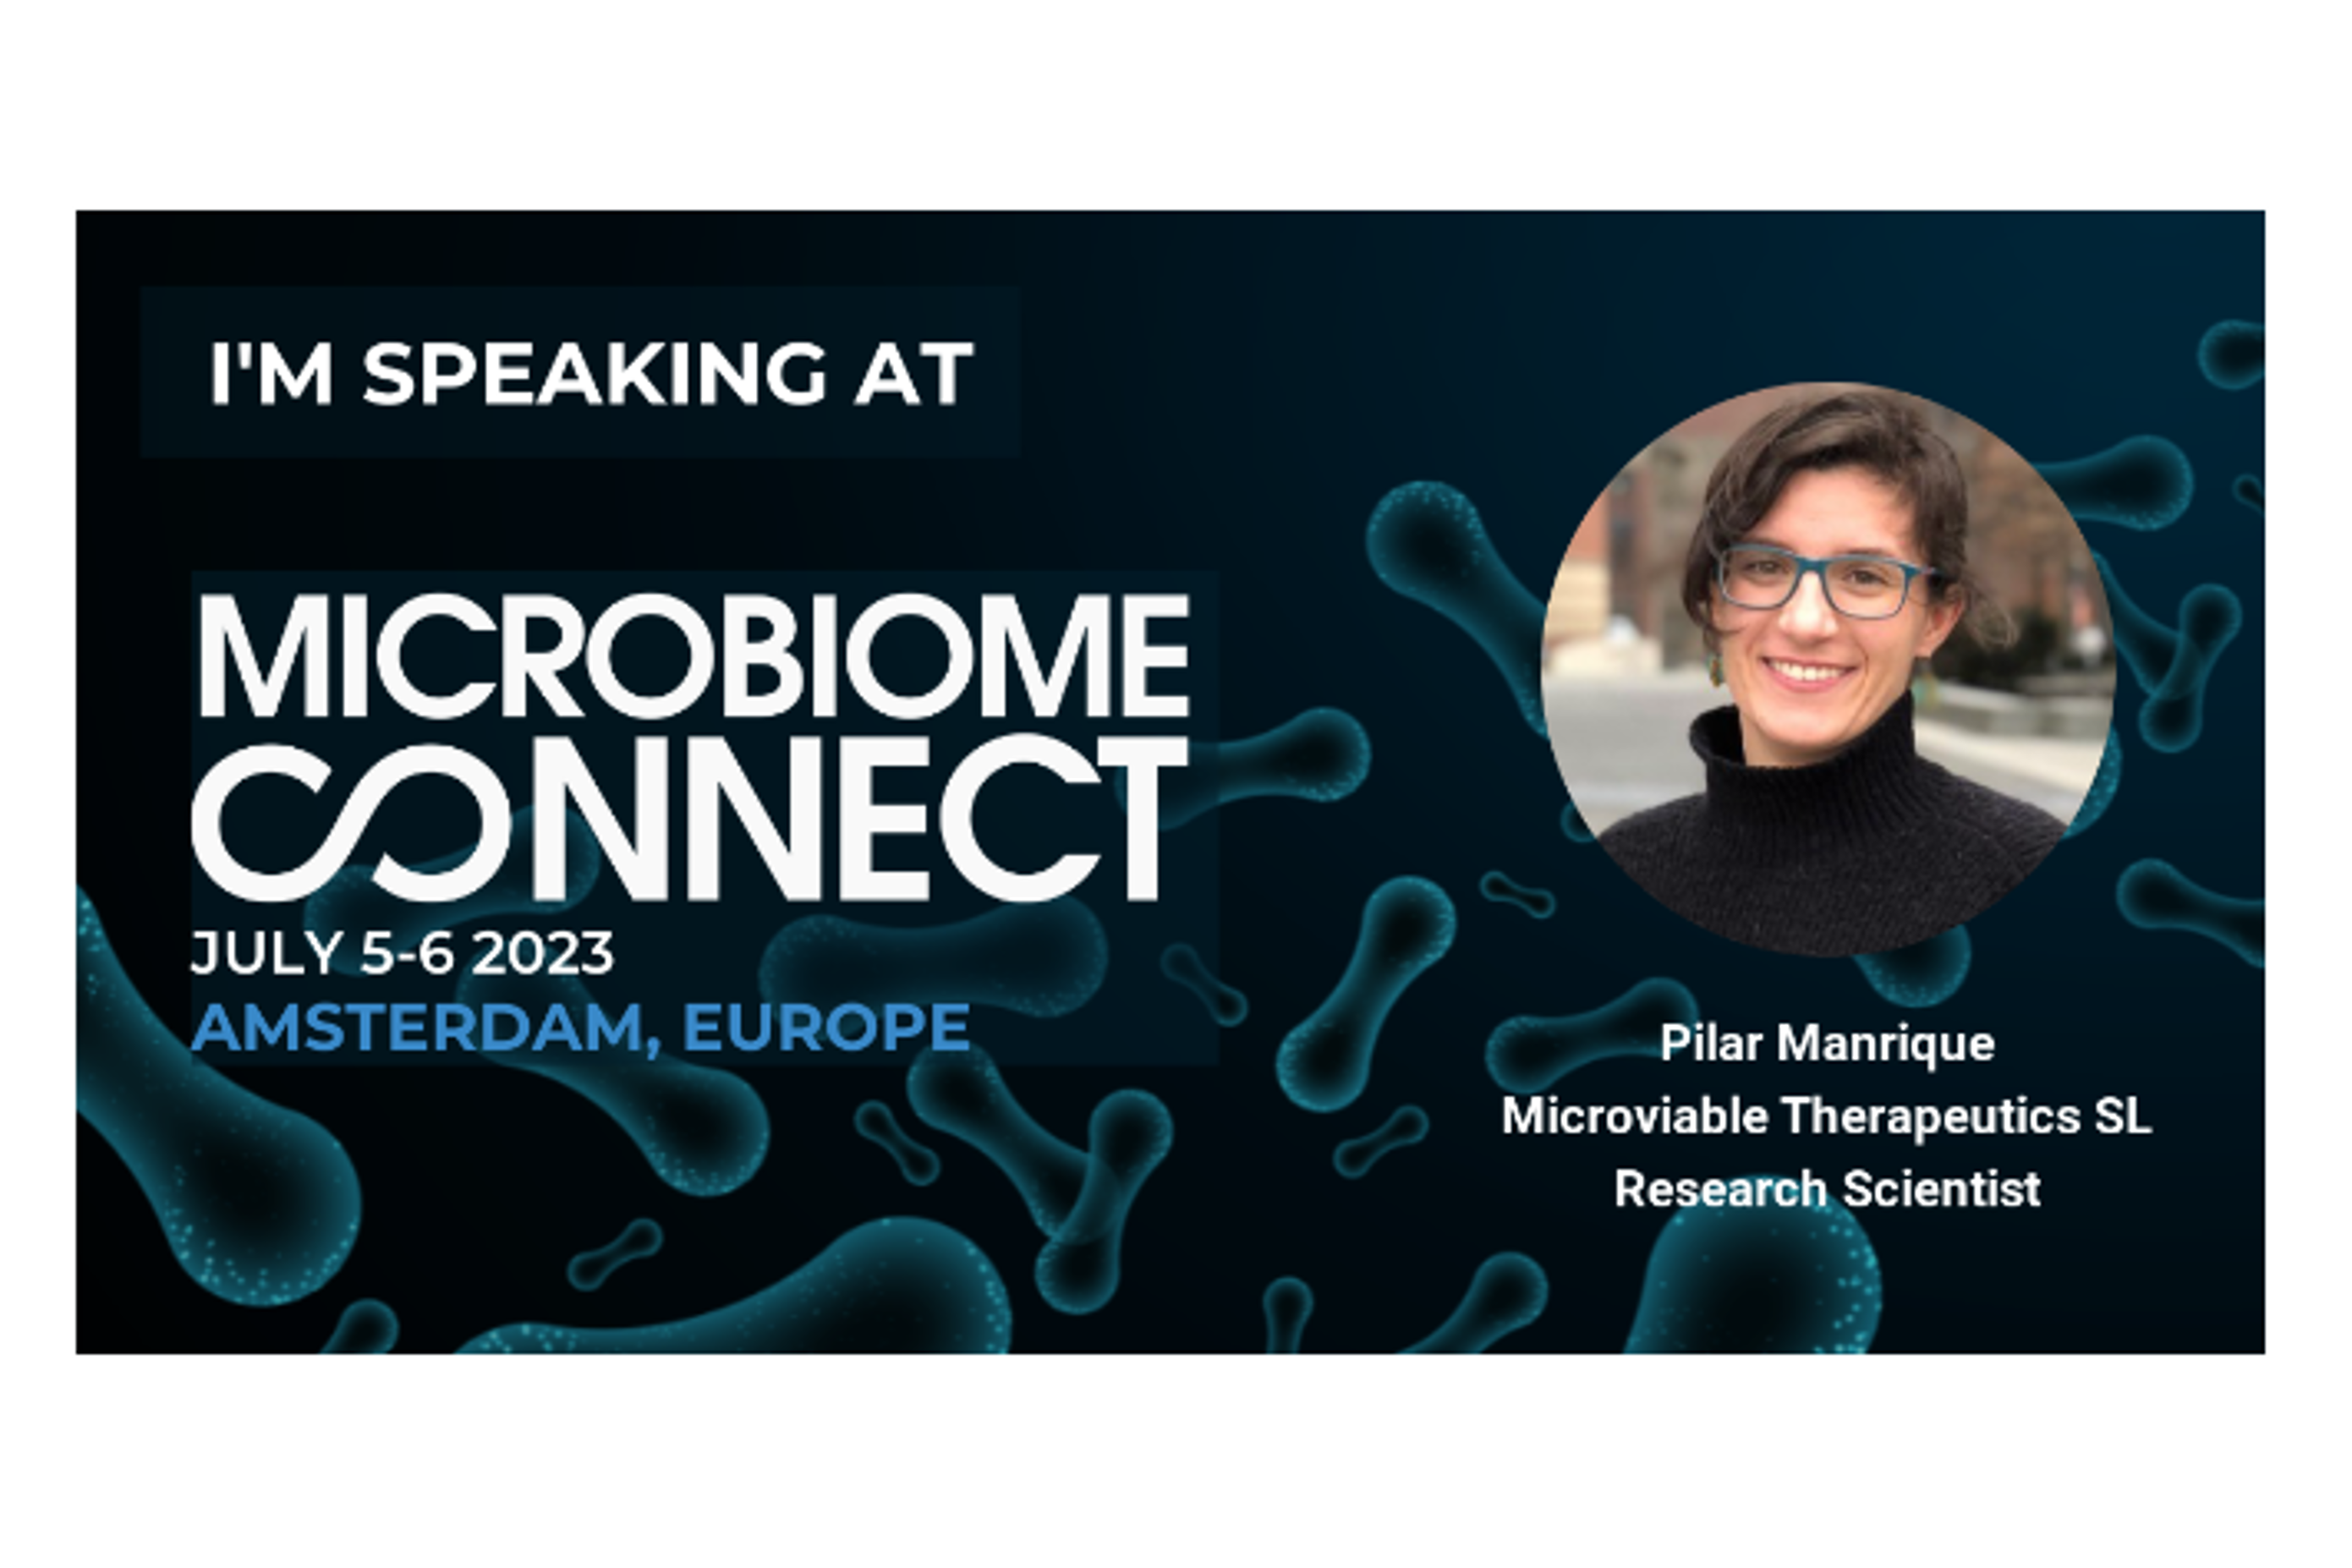 Microbiome Connect Europe 2023. Microviable Therapeutics